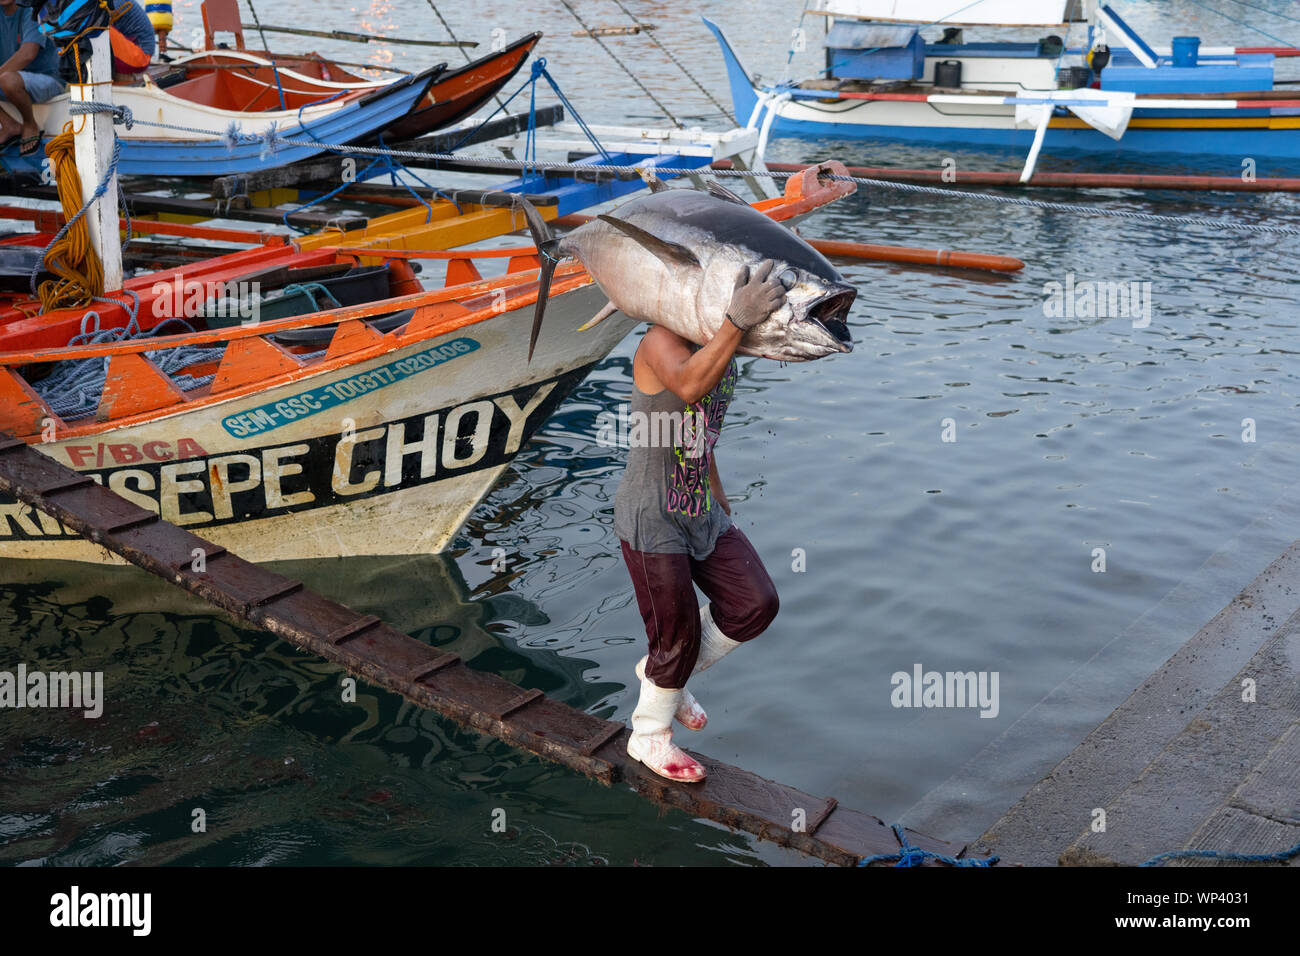 A man carrying a large Yellowfin Tuna on his shoulder from a boat within the Fishport at General Santos,Philippines Stock Photo